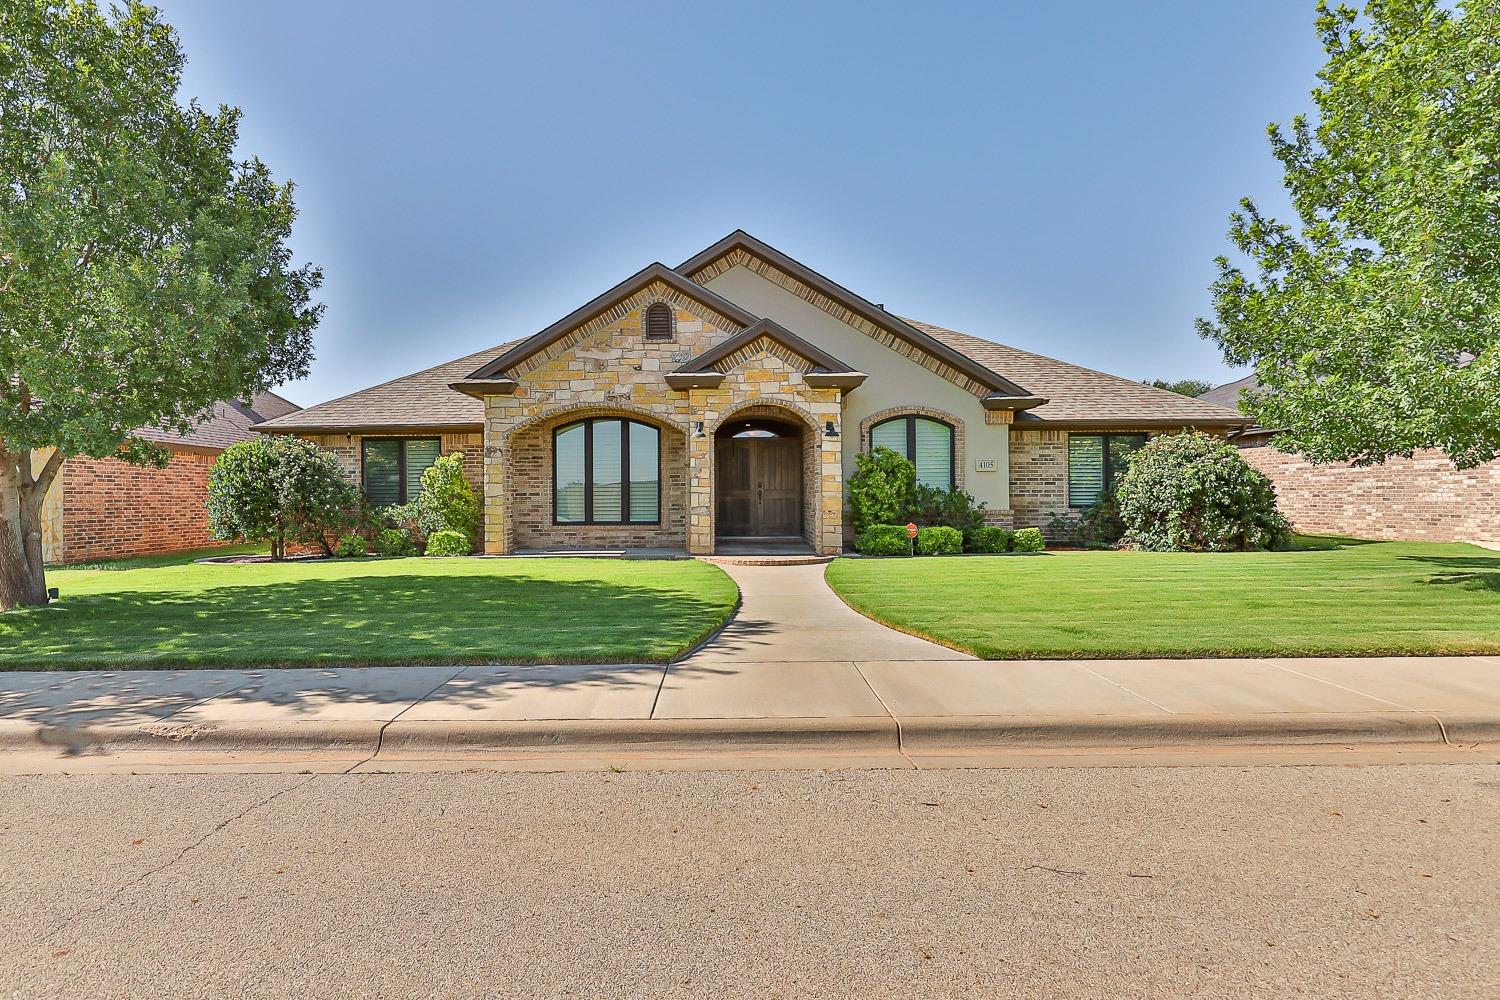 Discover the beauty of this custom-built 4-bed, 3-bath home in Brooke Heights, in highly desired Lubbock Cooper ISD. Enjoy an open living/kitchen area with a stone fireplace, granite island, custom cabinets, and stainless steel appliances. The master suite offers a spa tub, tiled shower, two large closets, and convienent back patio access.  This home offers two eating areas, one of which is the dining room featuring a stunning built-in buffet with wine rack. Spacious laundry room with extra storage. The large backyard boasts a built-in kitchen, charming pergola, and privacy fence.  The  park's serene ambiance is accentuated by its tranquil lighting system. The property comes with several notable upgrades, including a new condenser unit, a state-of-the-art Wi-Fi b-hyve smart outdoor sprinkler system, a Vivint security camera system, a new microwave and dishwasher and a reverse osmosis water system has been installed. Seller offering $2,500 paint allowance with acceptable offer.